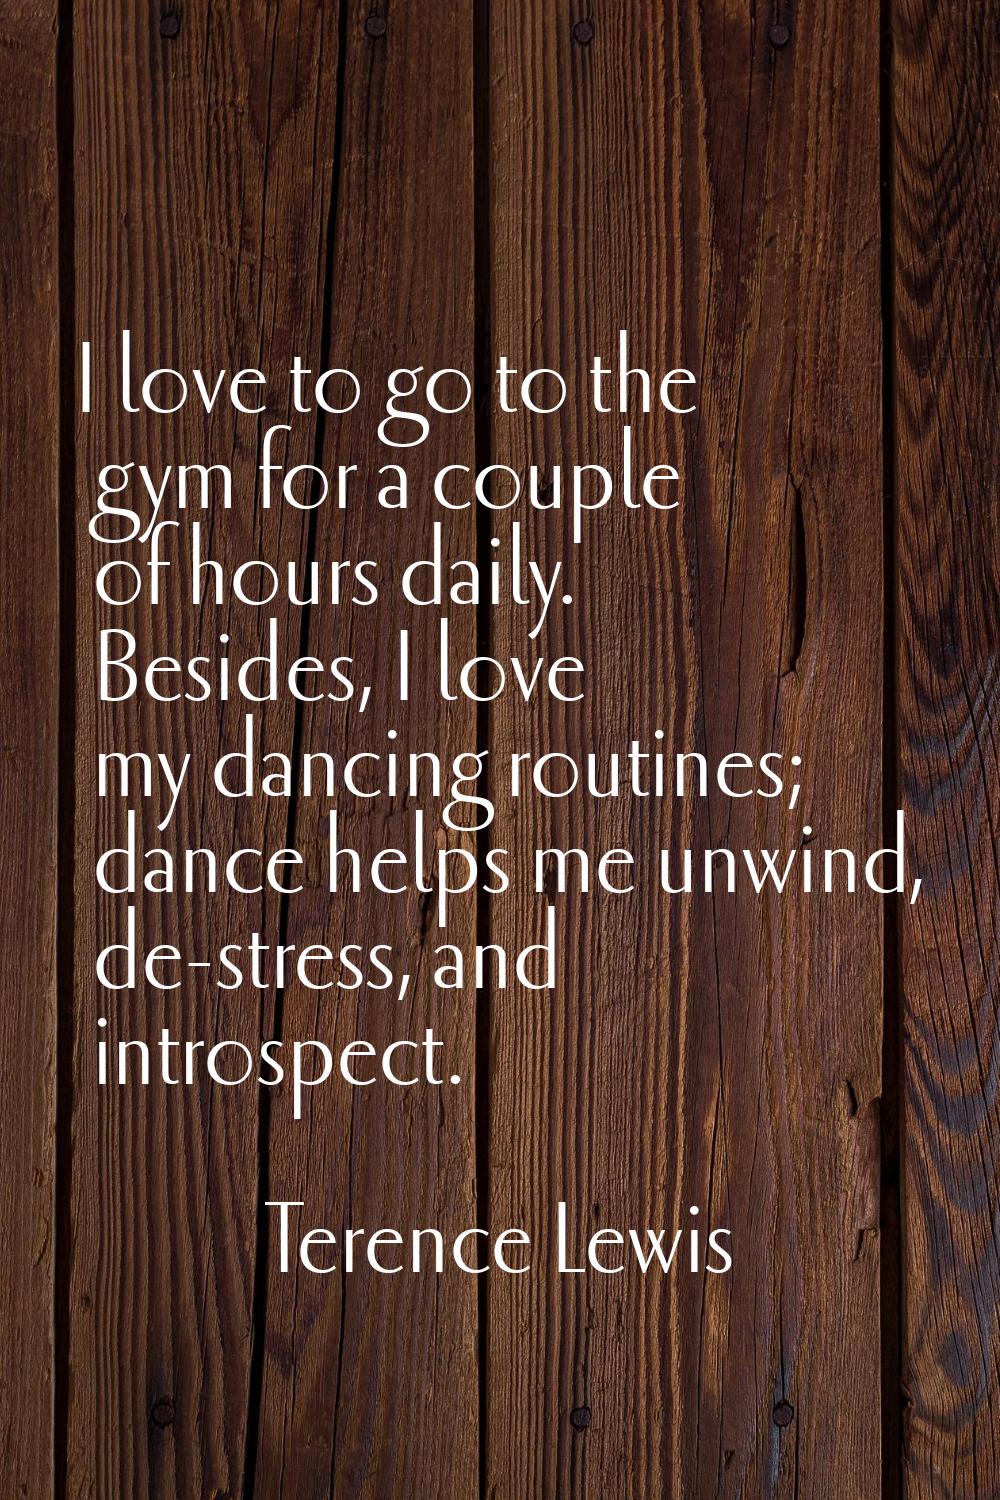 I love to go to the gym for a couple of hours daily. Besides, I love my dancing routines; dance hel